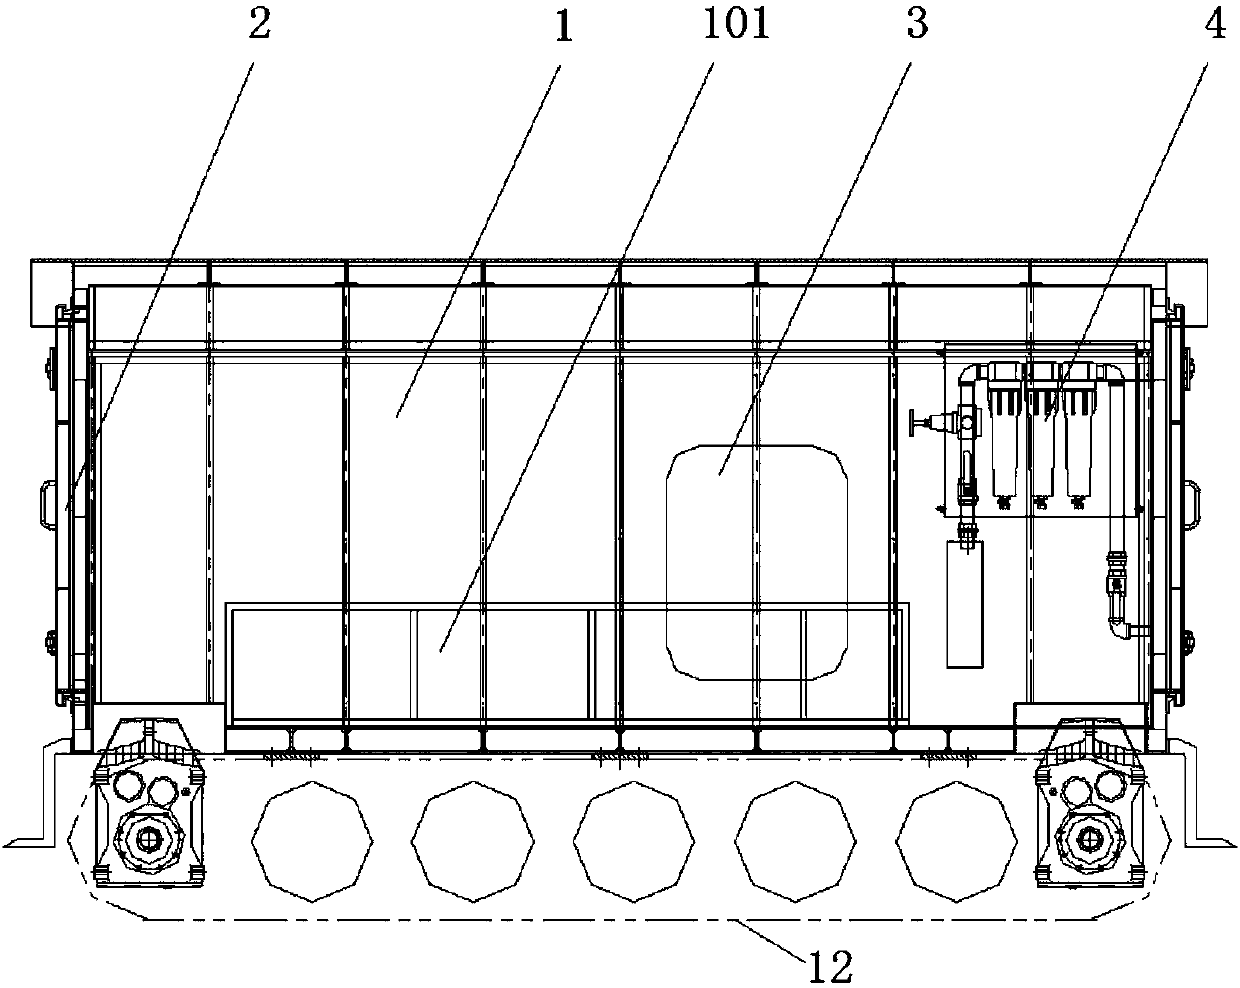 A self-propelled tunnel construction lifesaving system